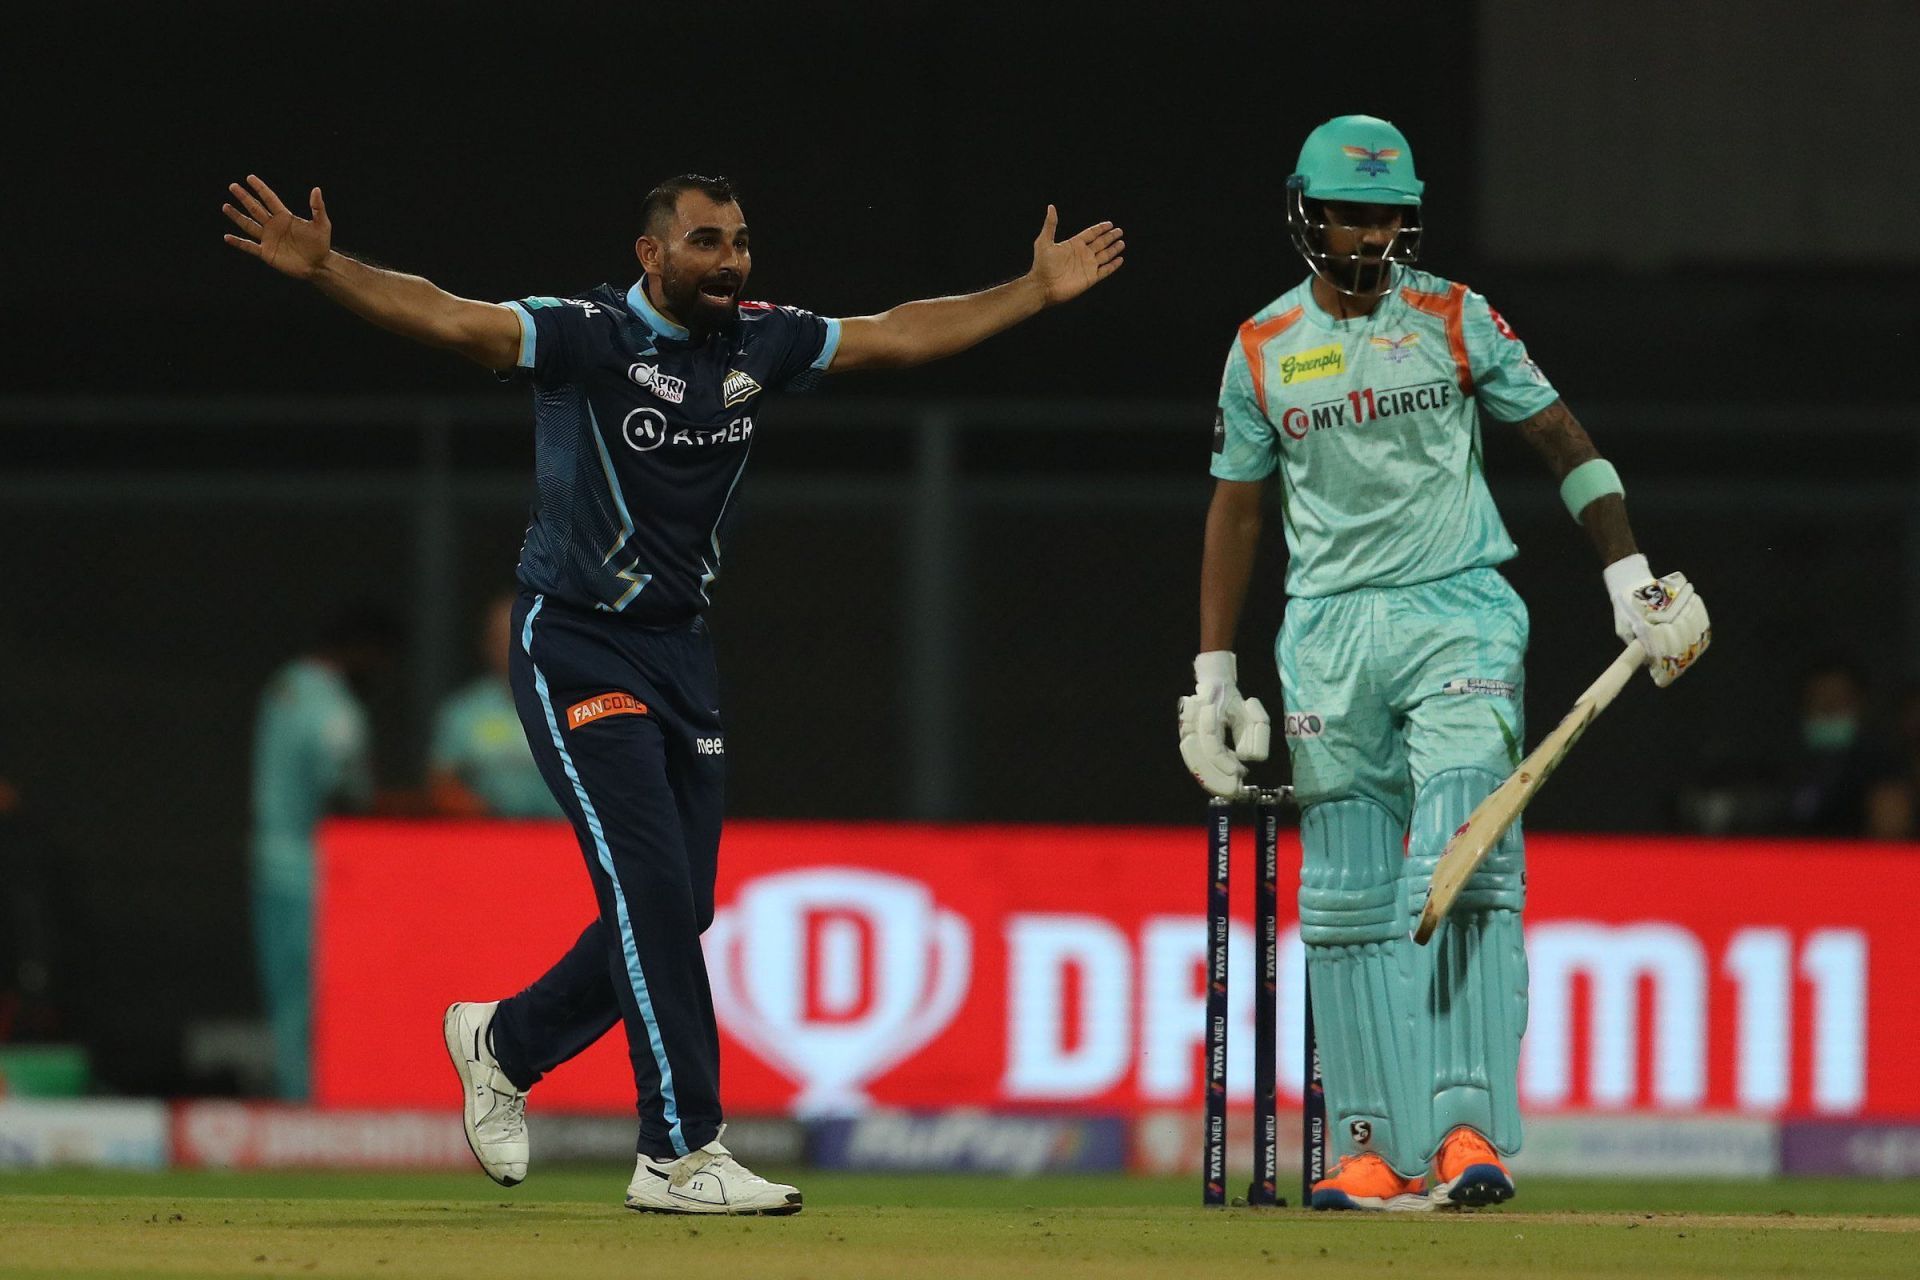 Mohammad Shami is a spectacular new-ball bowler in any format (Image: Twitter/Gujarat Titans)